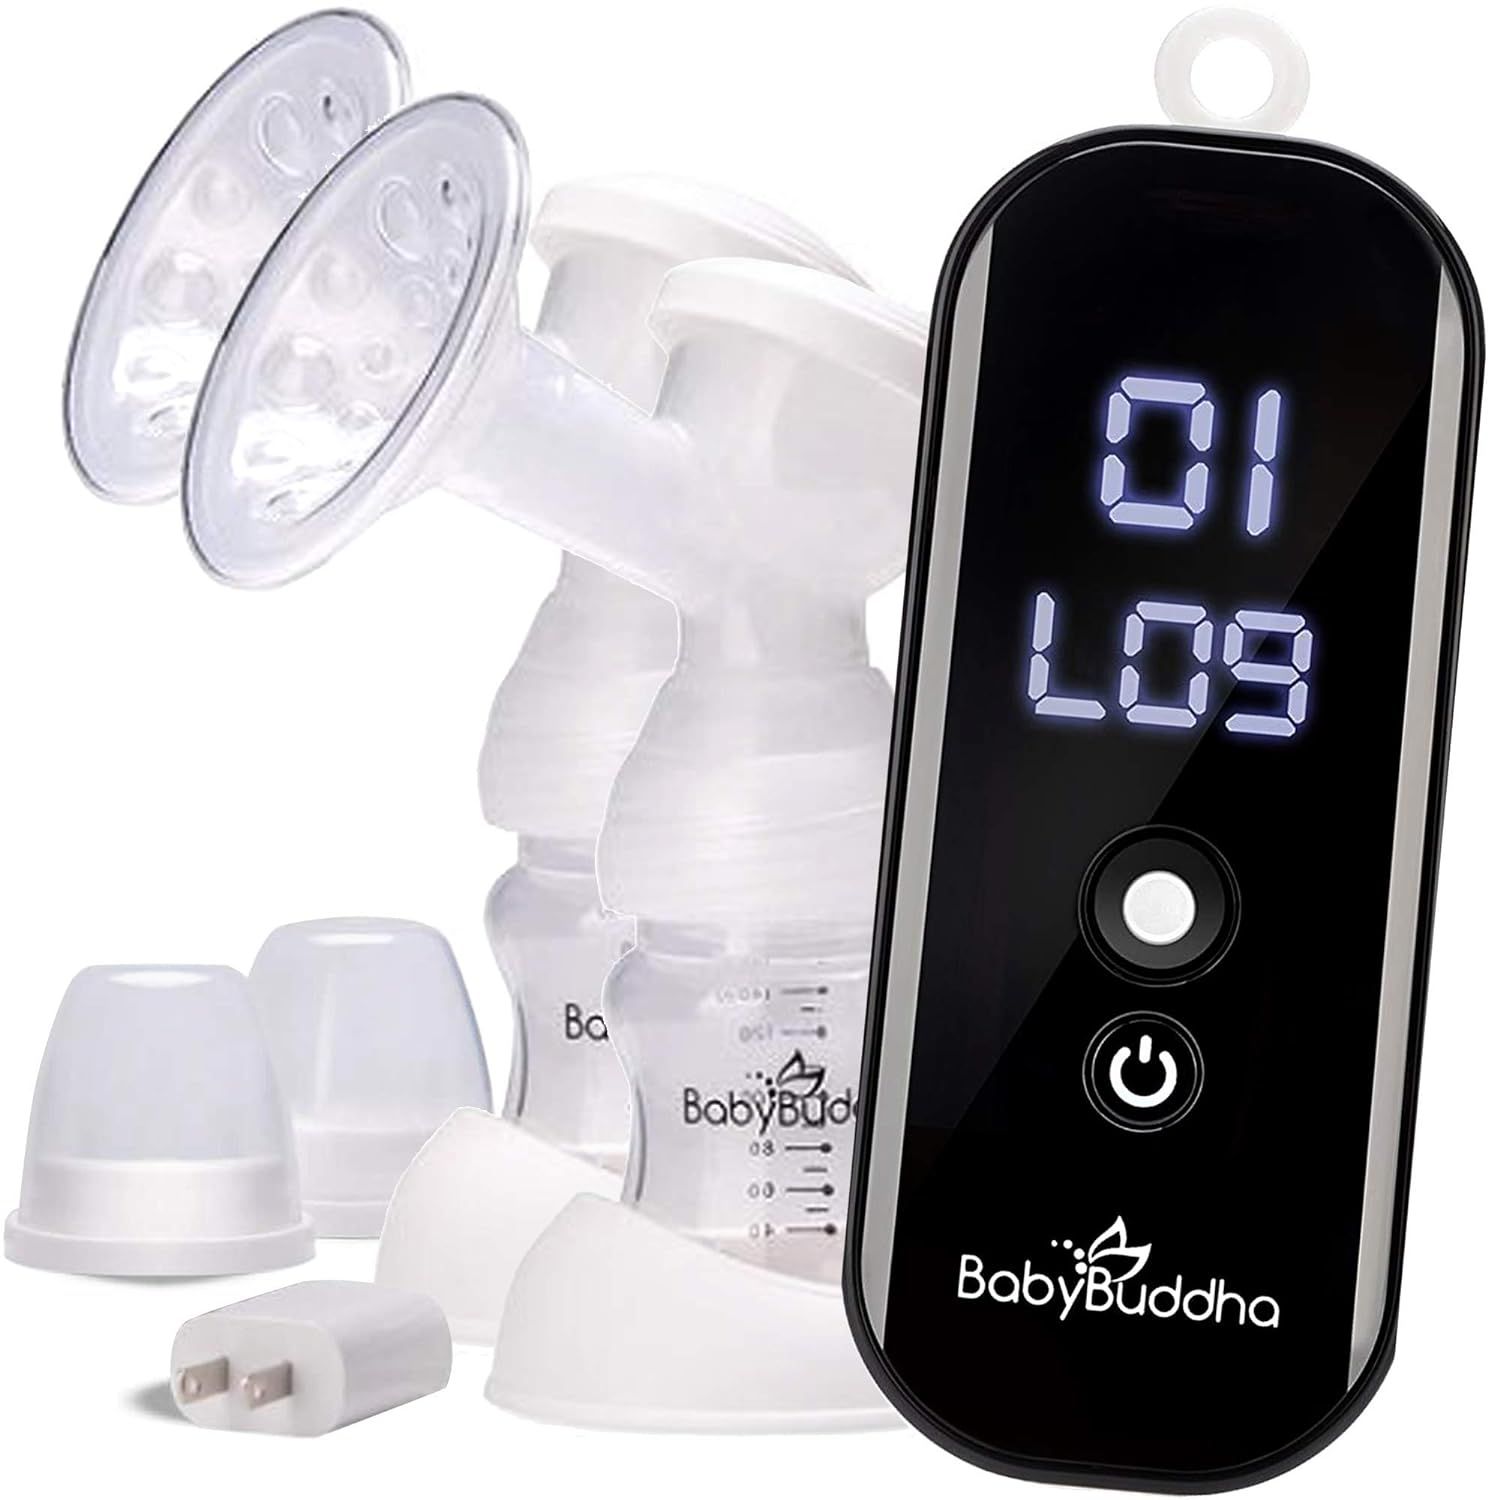 BabyBuddha Portable and Compact Breast Pump - Electronic & Hands-Free - Single and Double Pump - ... | Amazon (US)